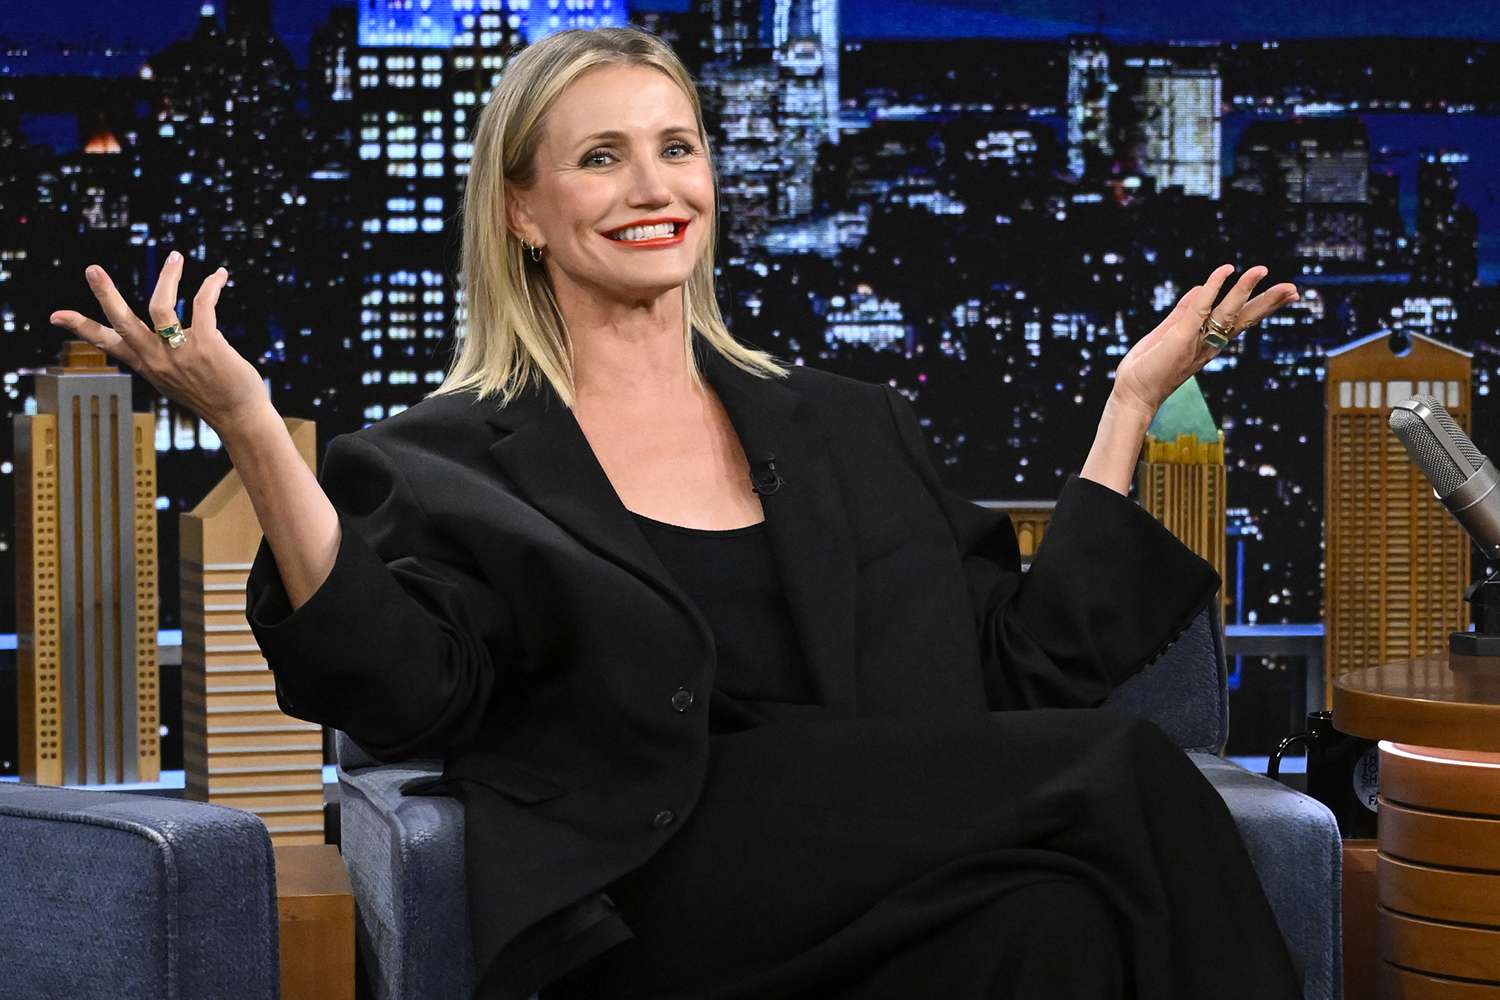 Cameron Diaz Advocates For Separate Bedrooms In Marriage